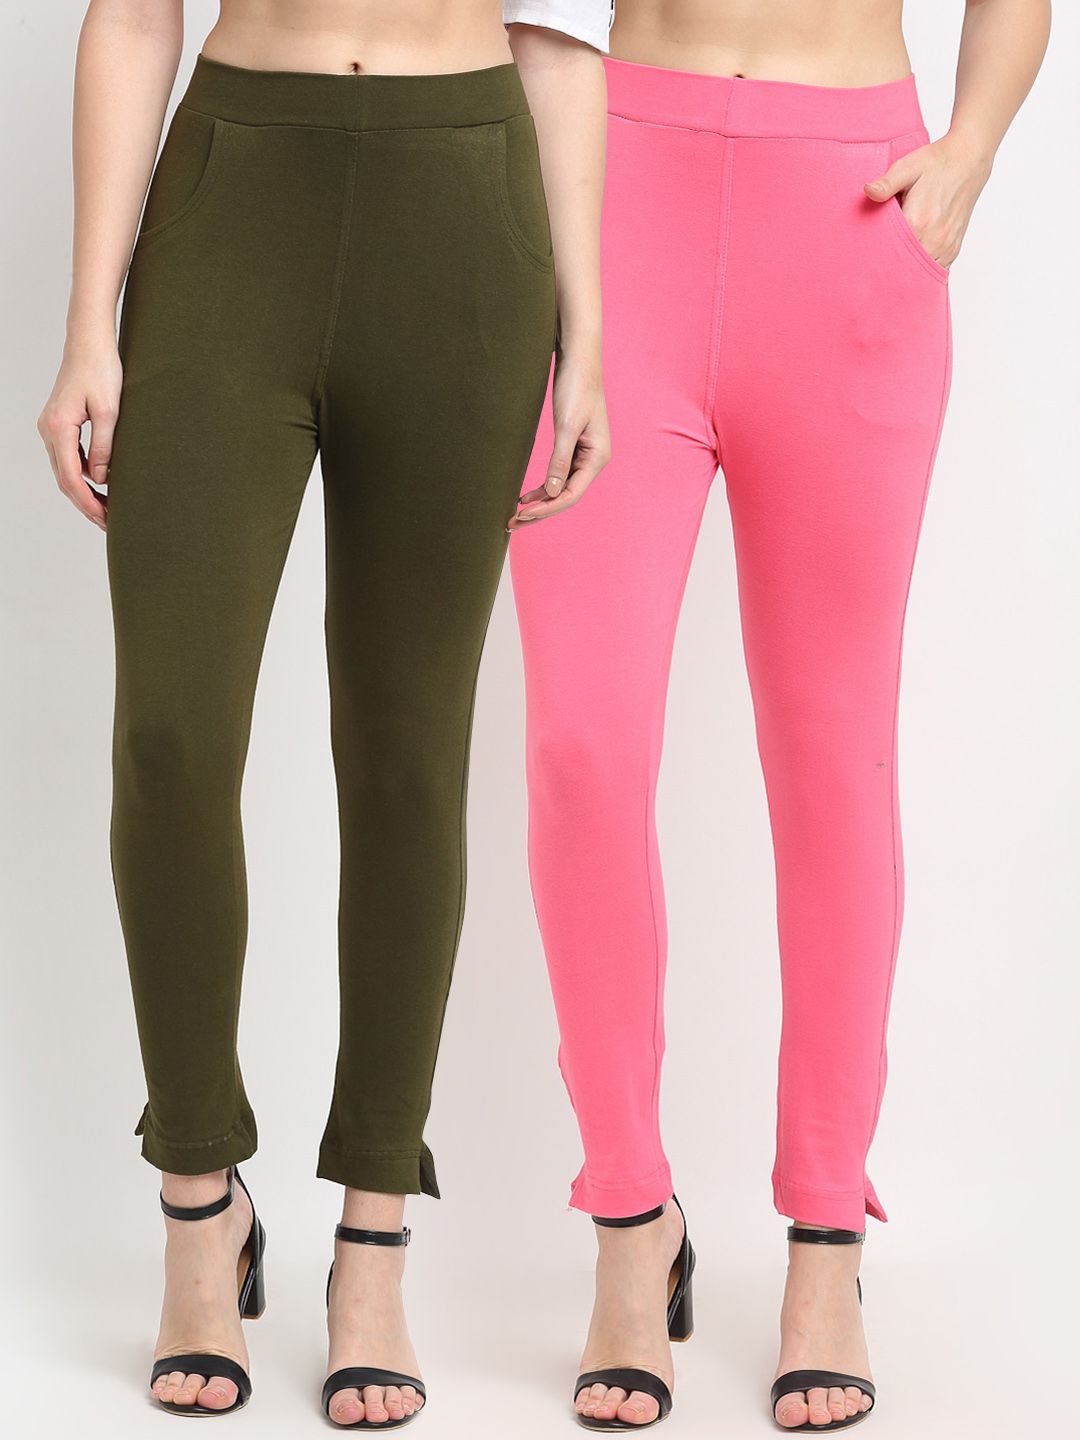 TAG 7 WOMEN Olive Green & Pink Pack of 2 Leggings Price in India